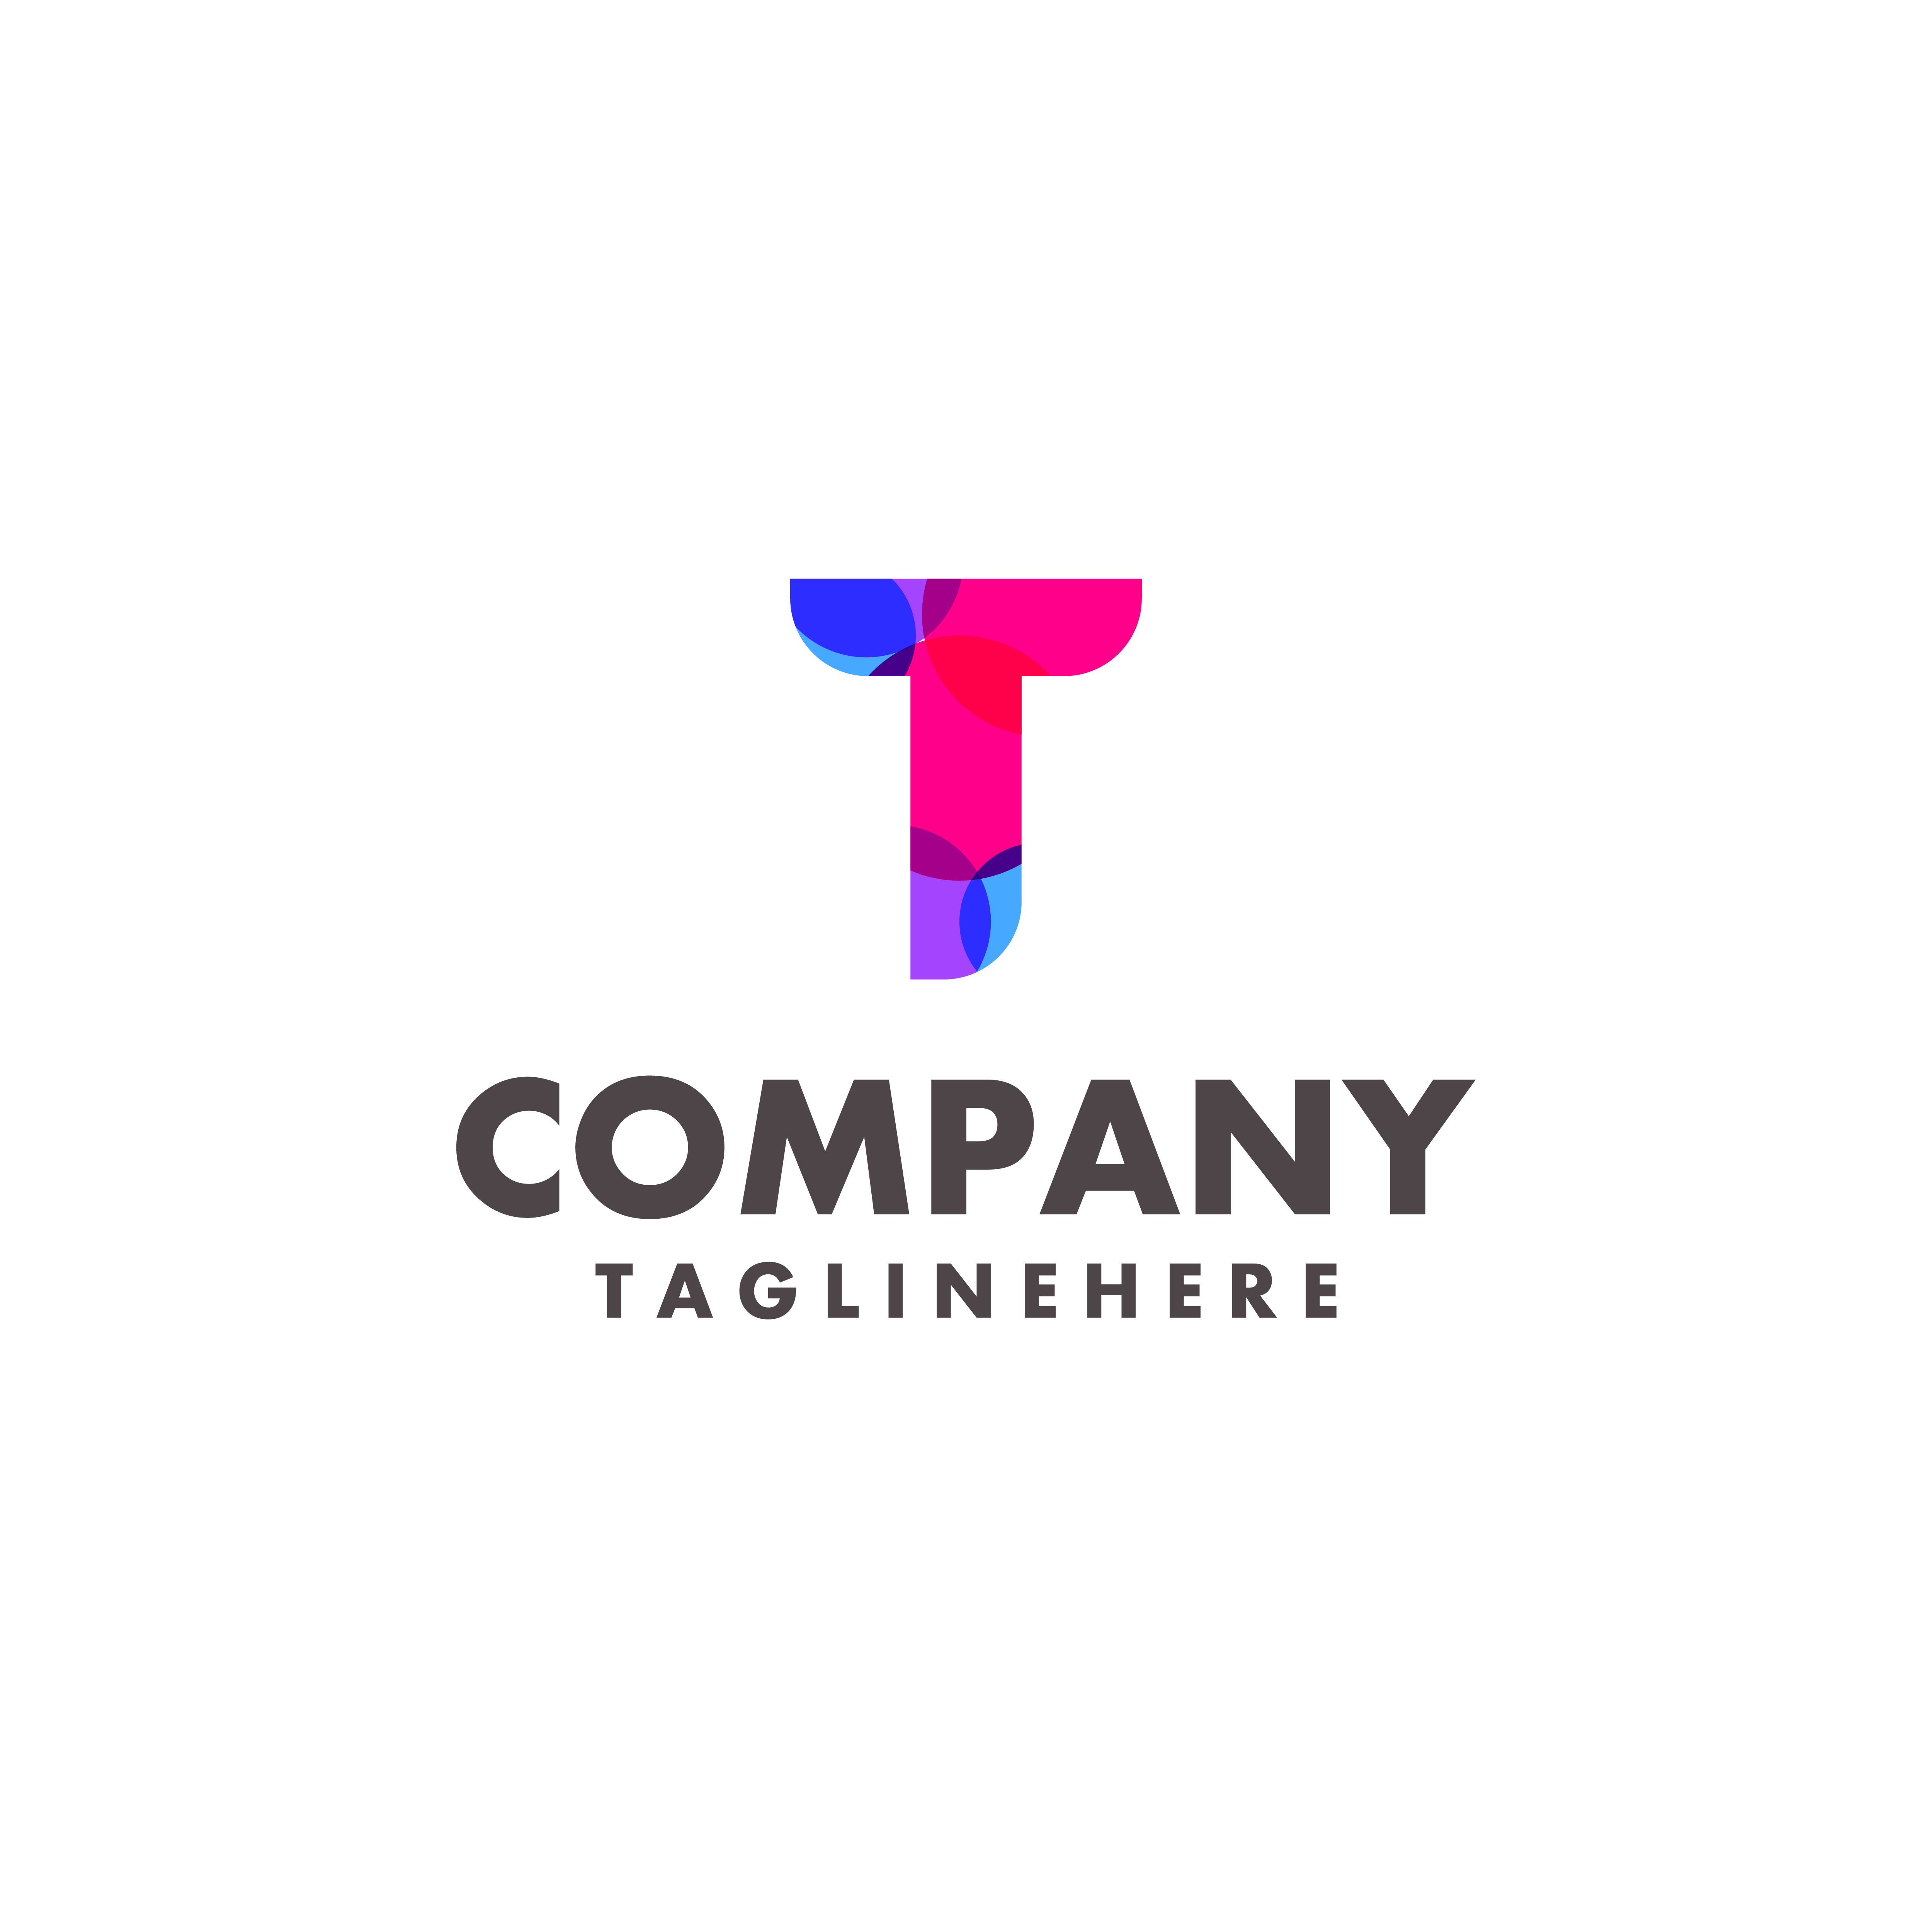 Abstract Colorful Letter T Logo Design For Business Company With Modern